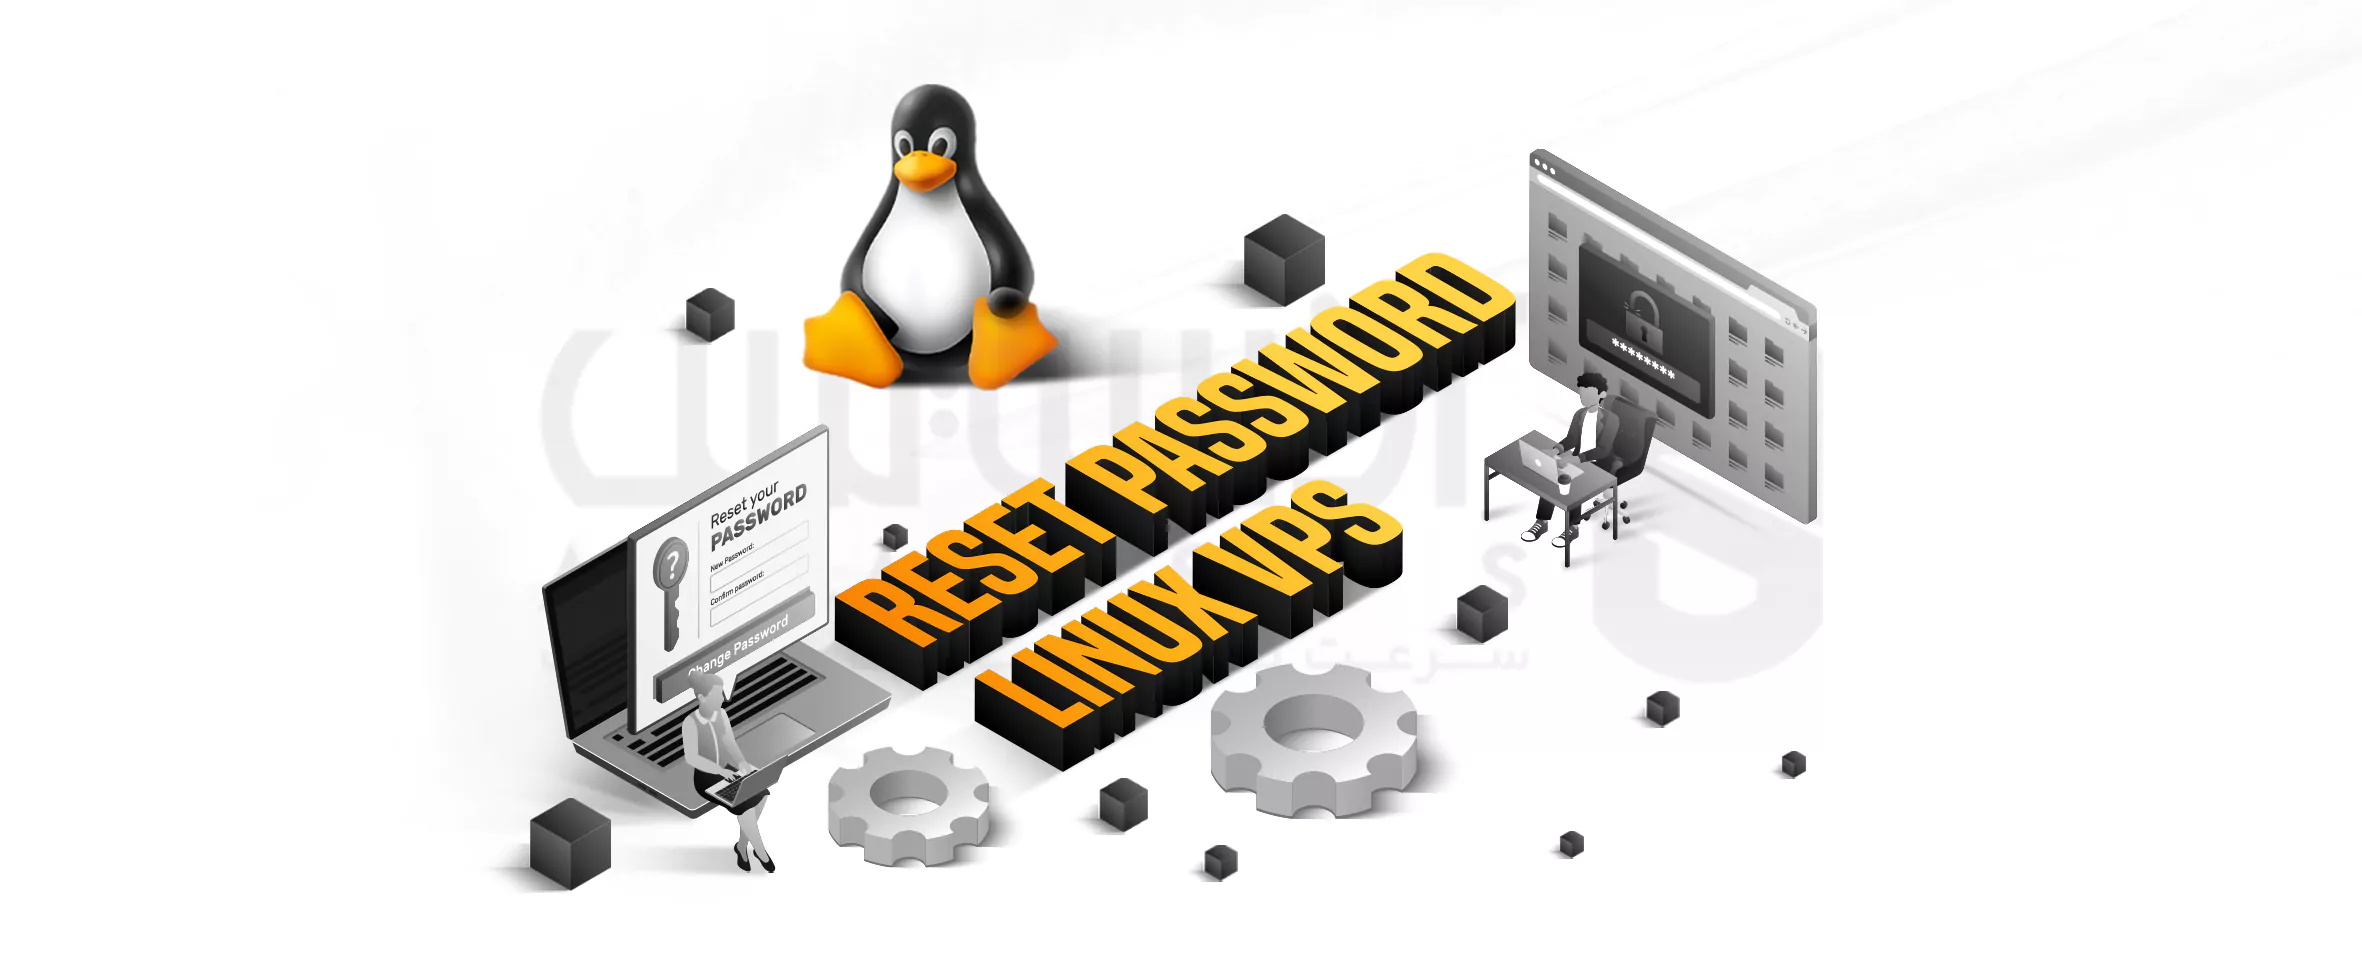 How to reset the Linux virtual server password